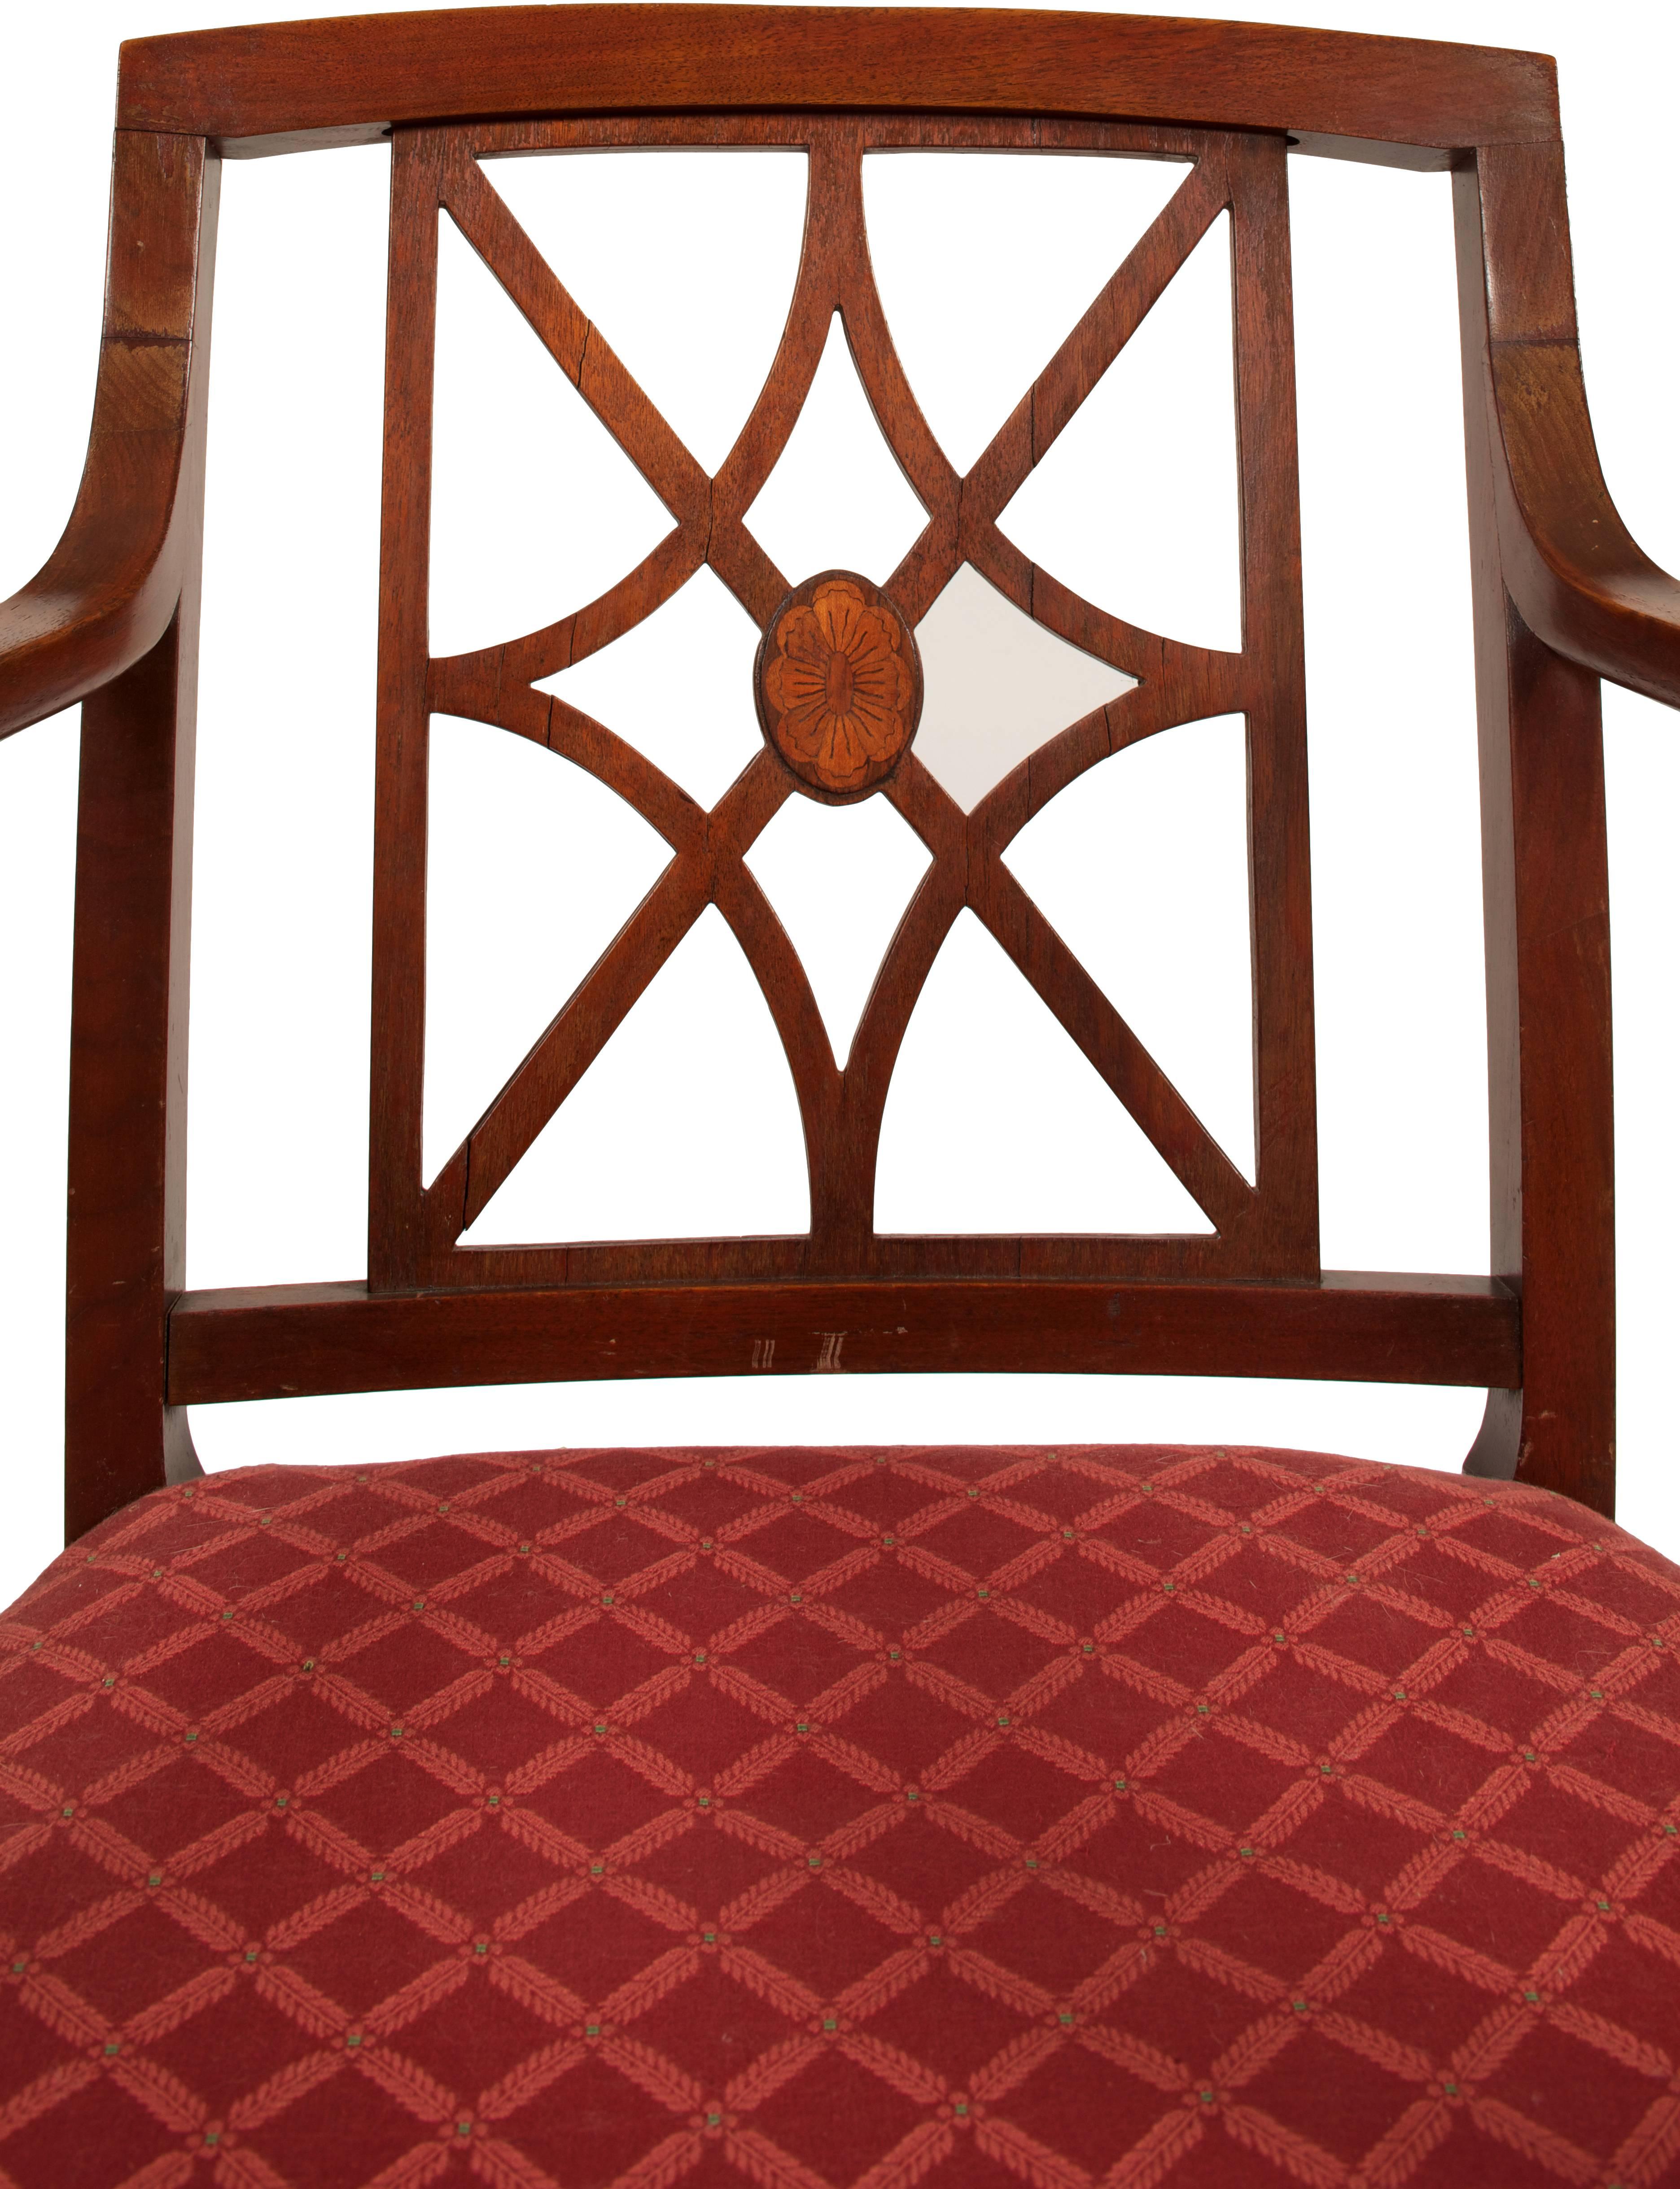 Chippendale Sheraton Style Fretwork Armchair For Sale